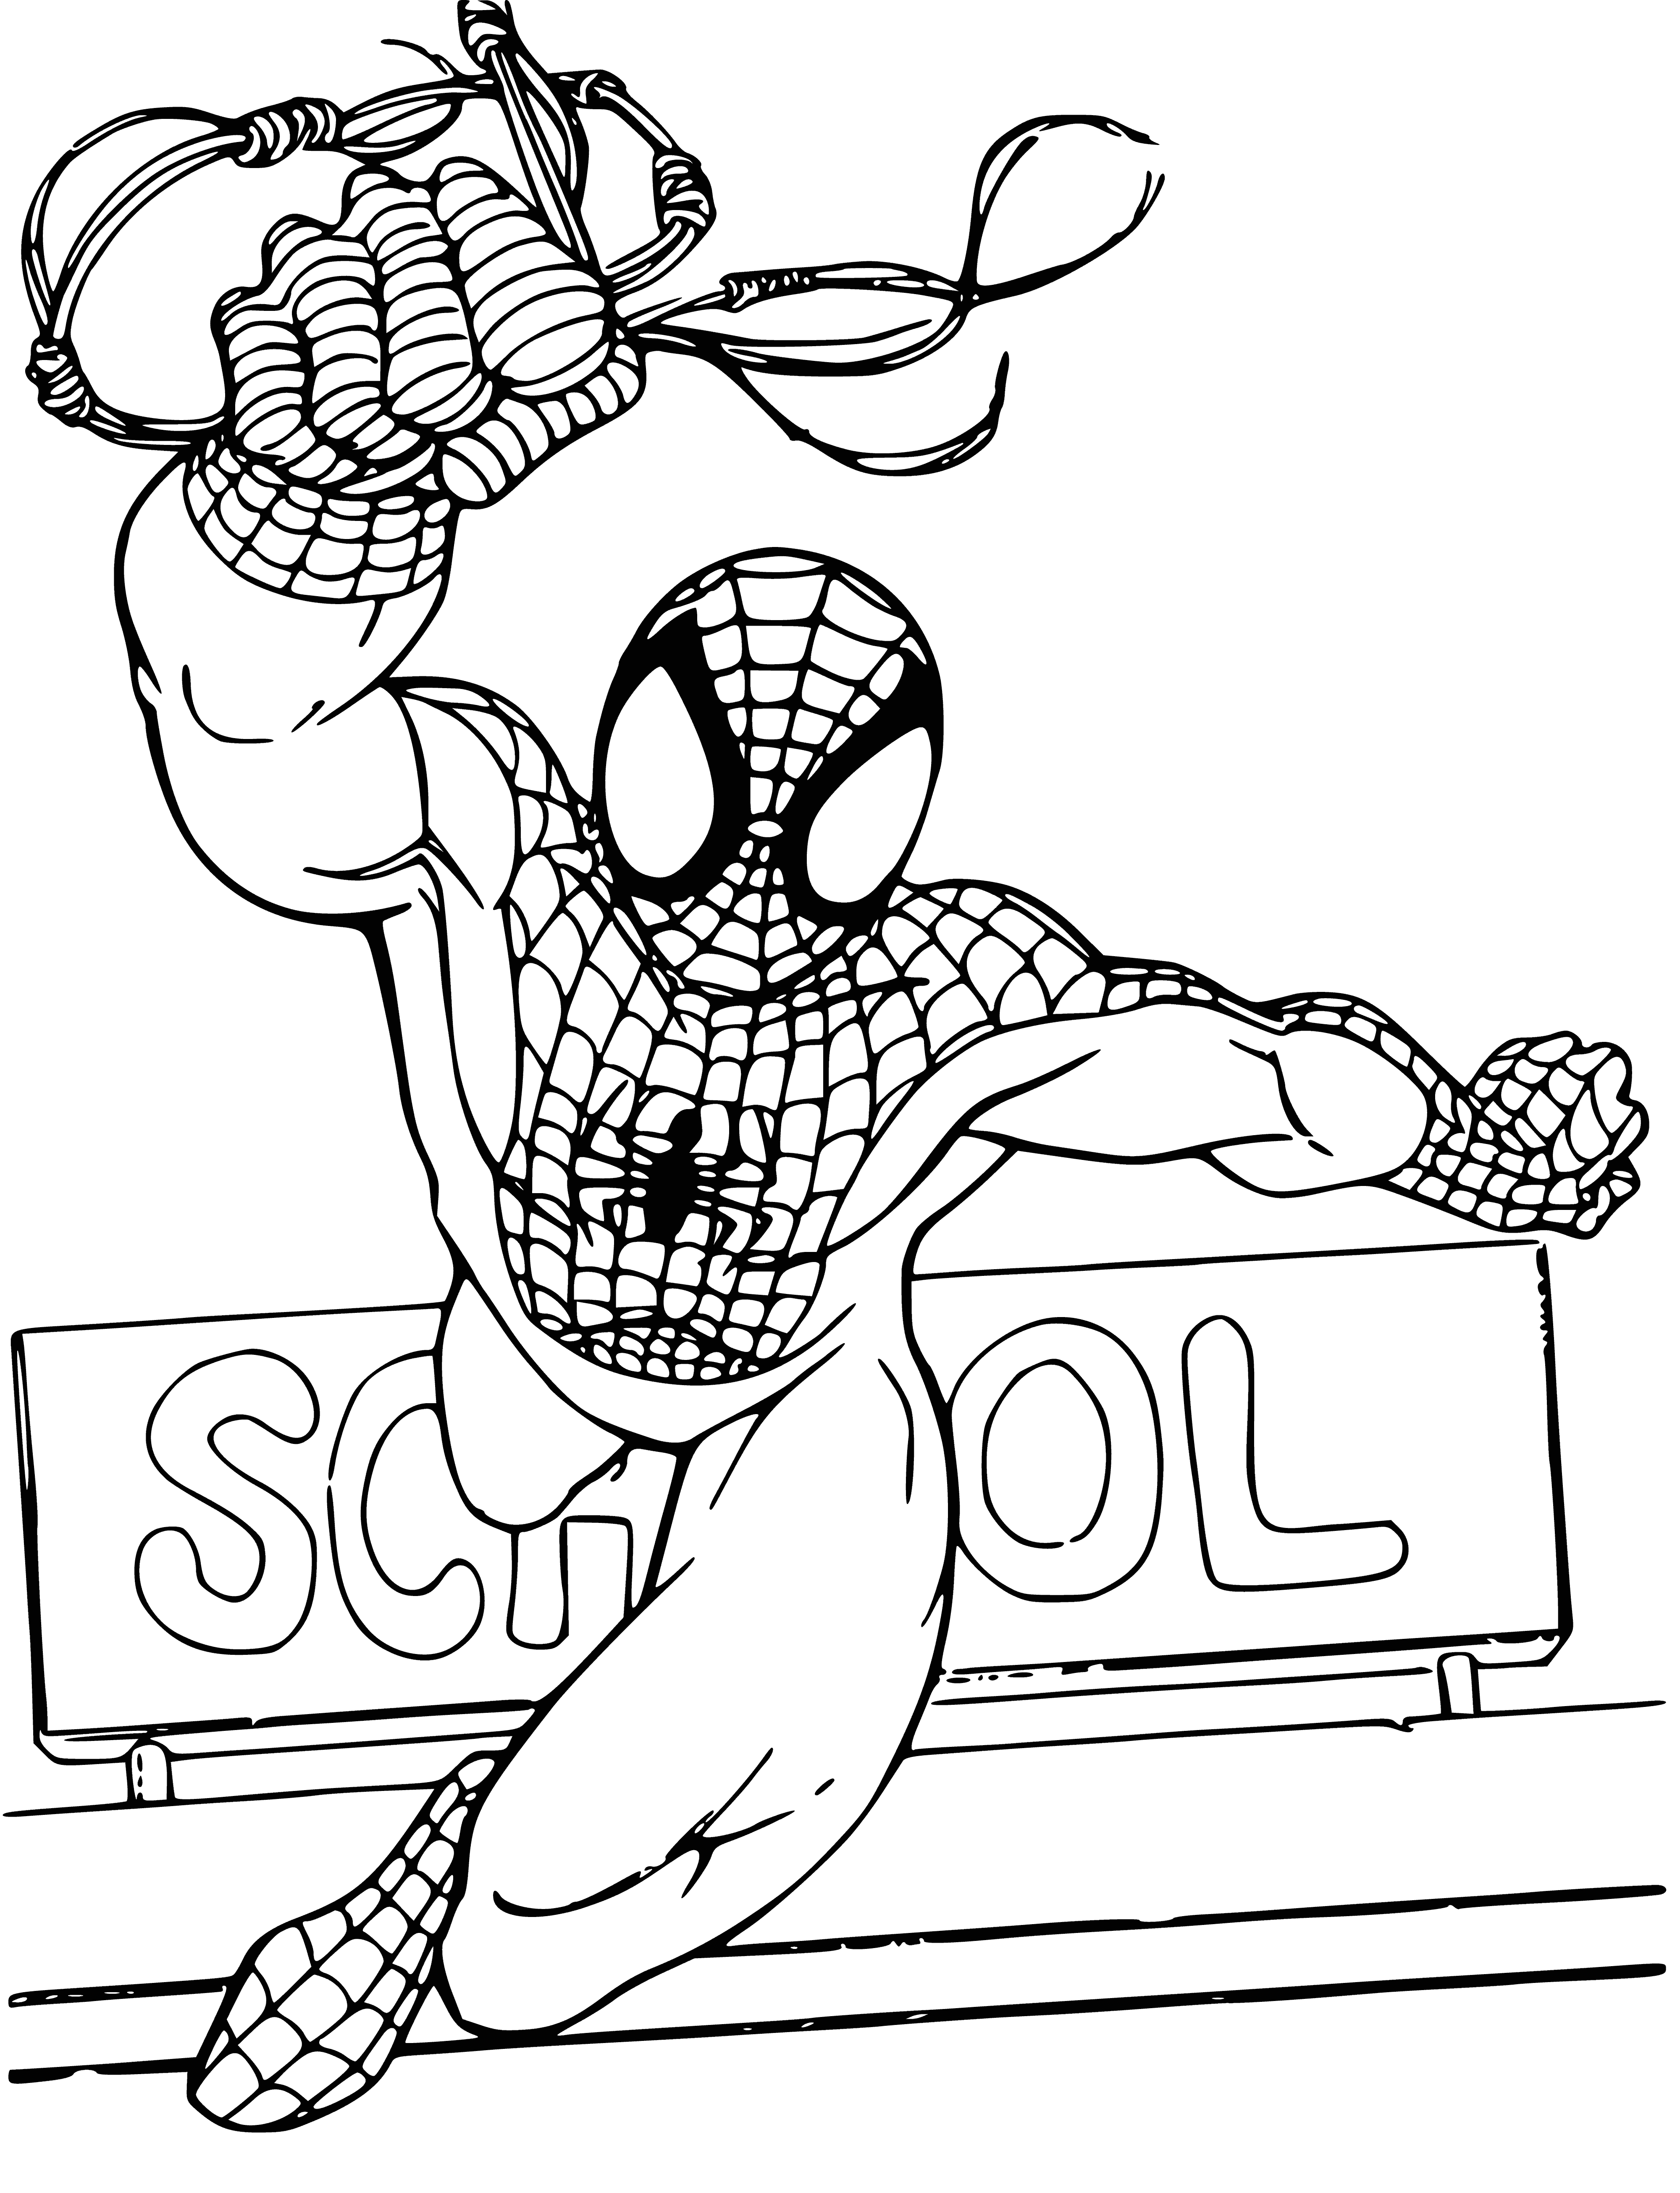 Spider-Man coloring page